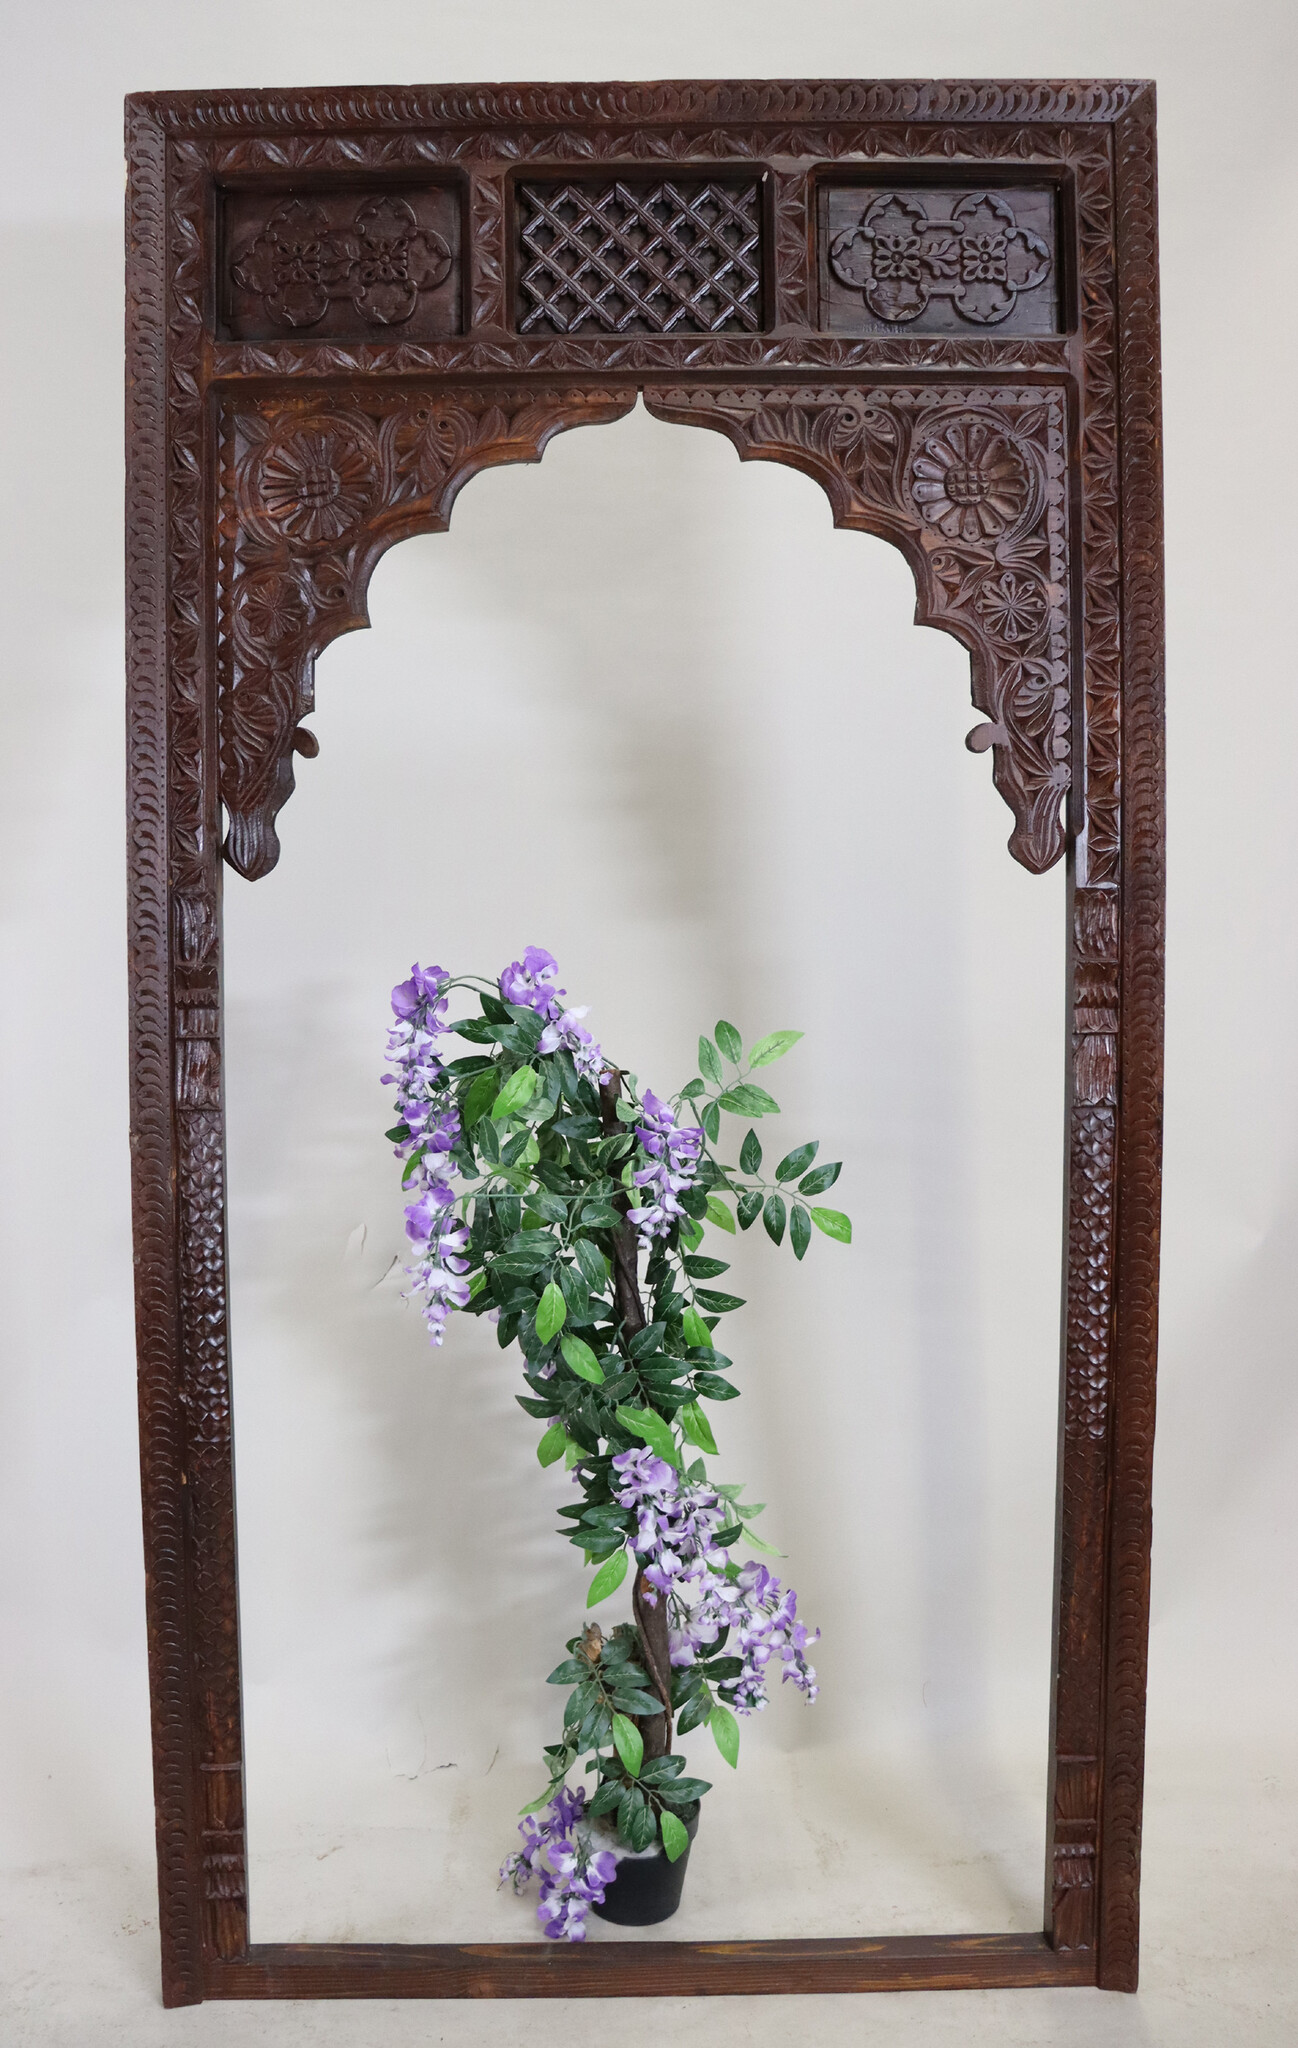 Mirror carving wooden Archway door Frame from Nuristan Afghanistan 23/H